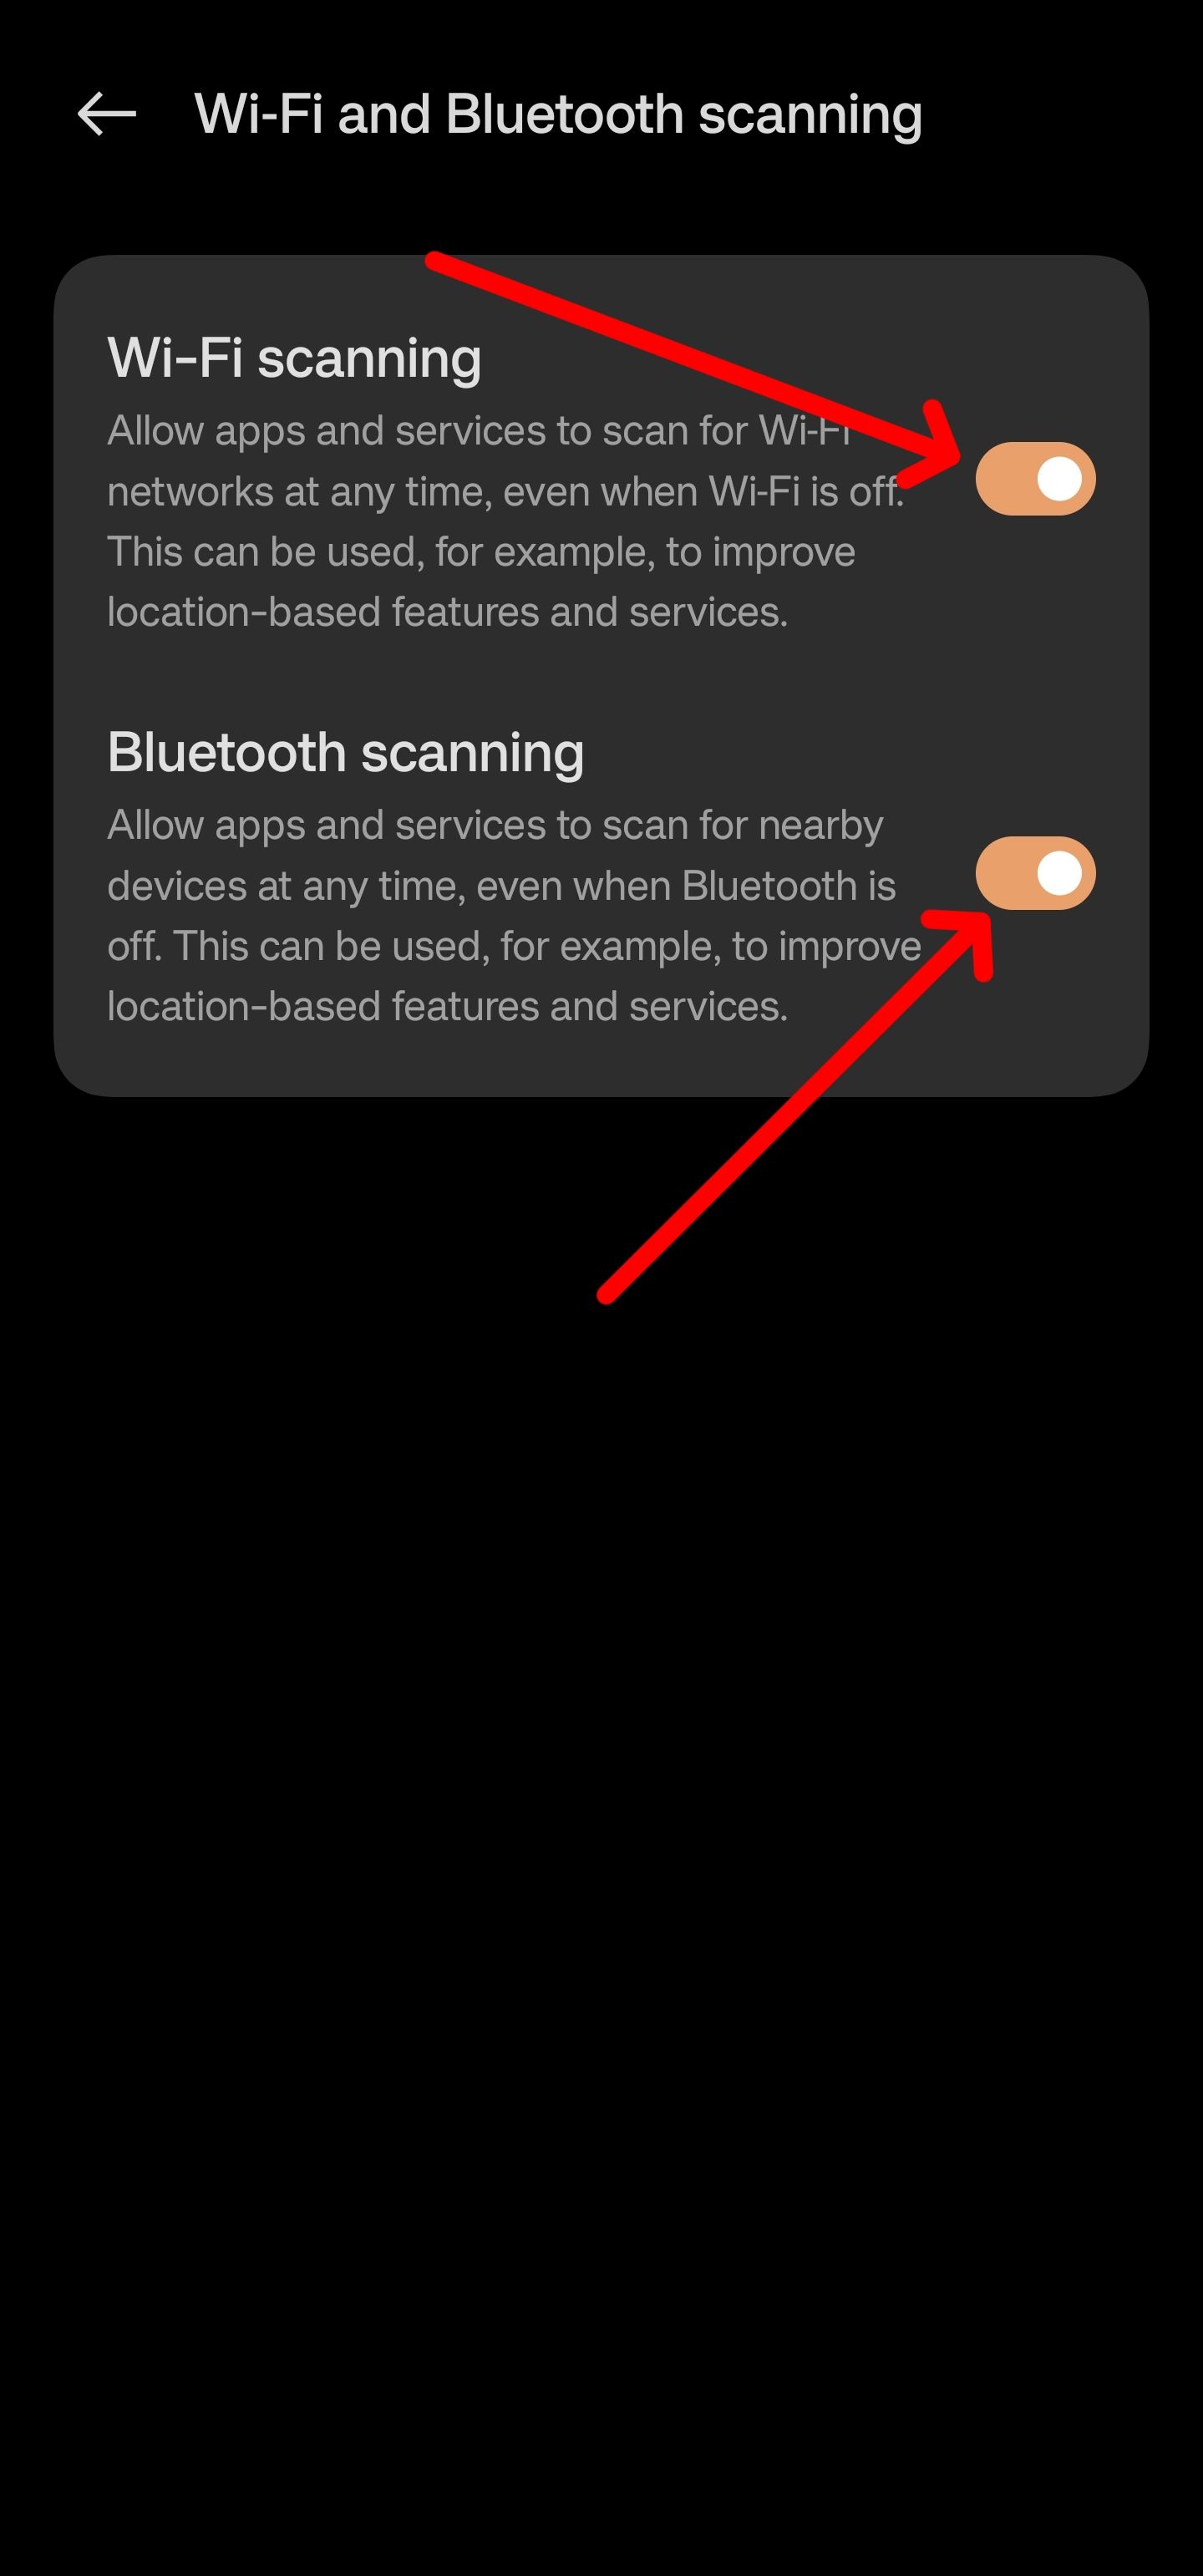 Select the sliders for both Wi-Fi and Bluetooth to turn their location services off.